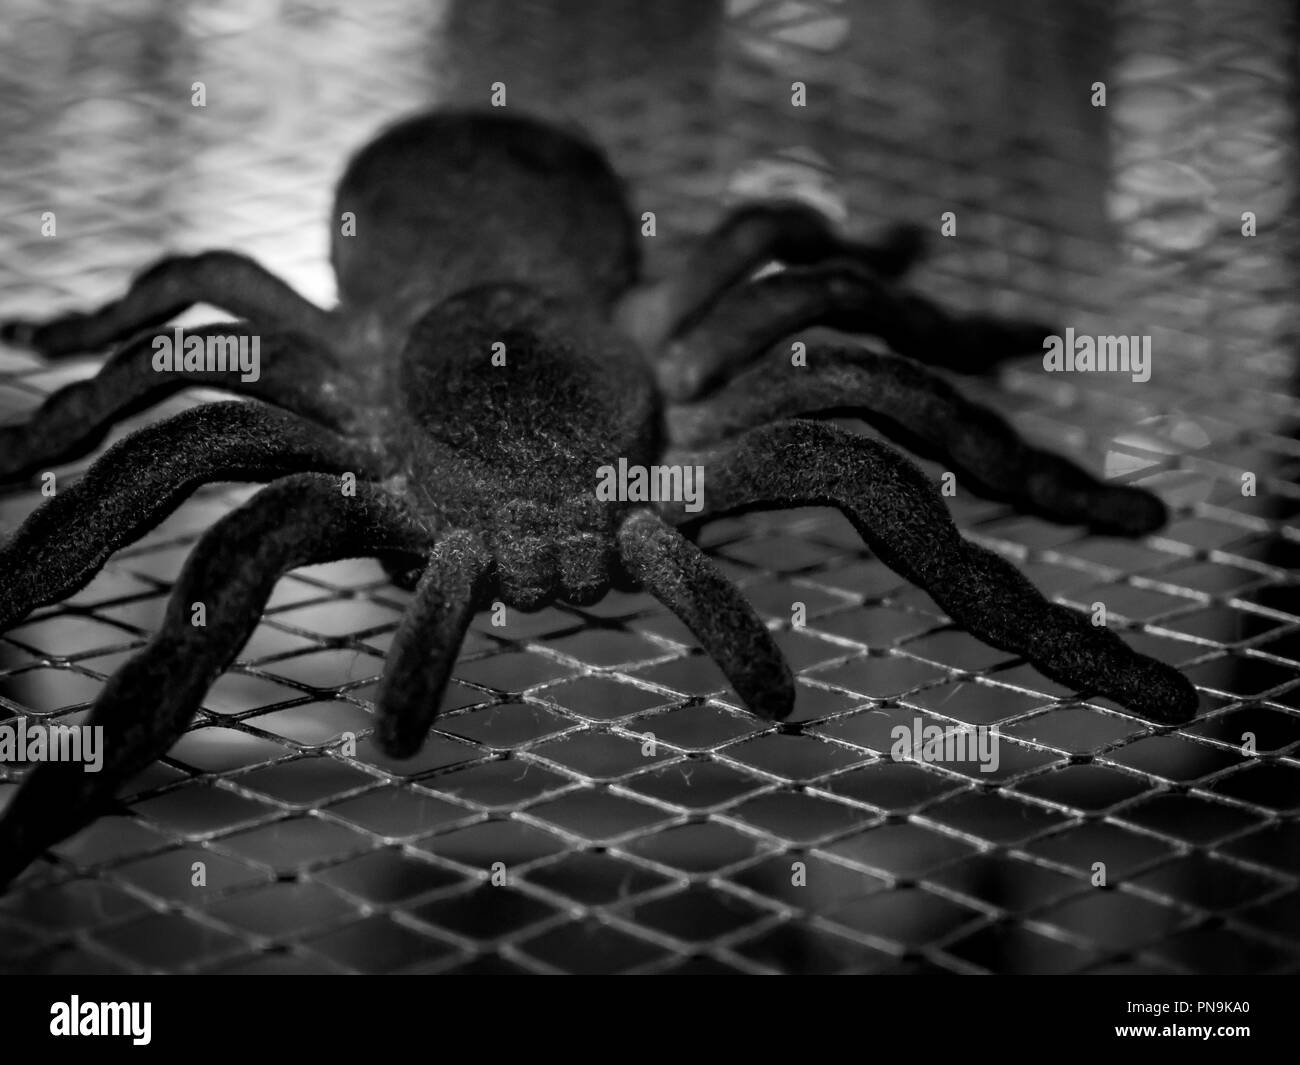 Black huge spider tarantula on the wire mesh. Mysterious and dangerous concept. Stock Photo